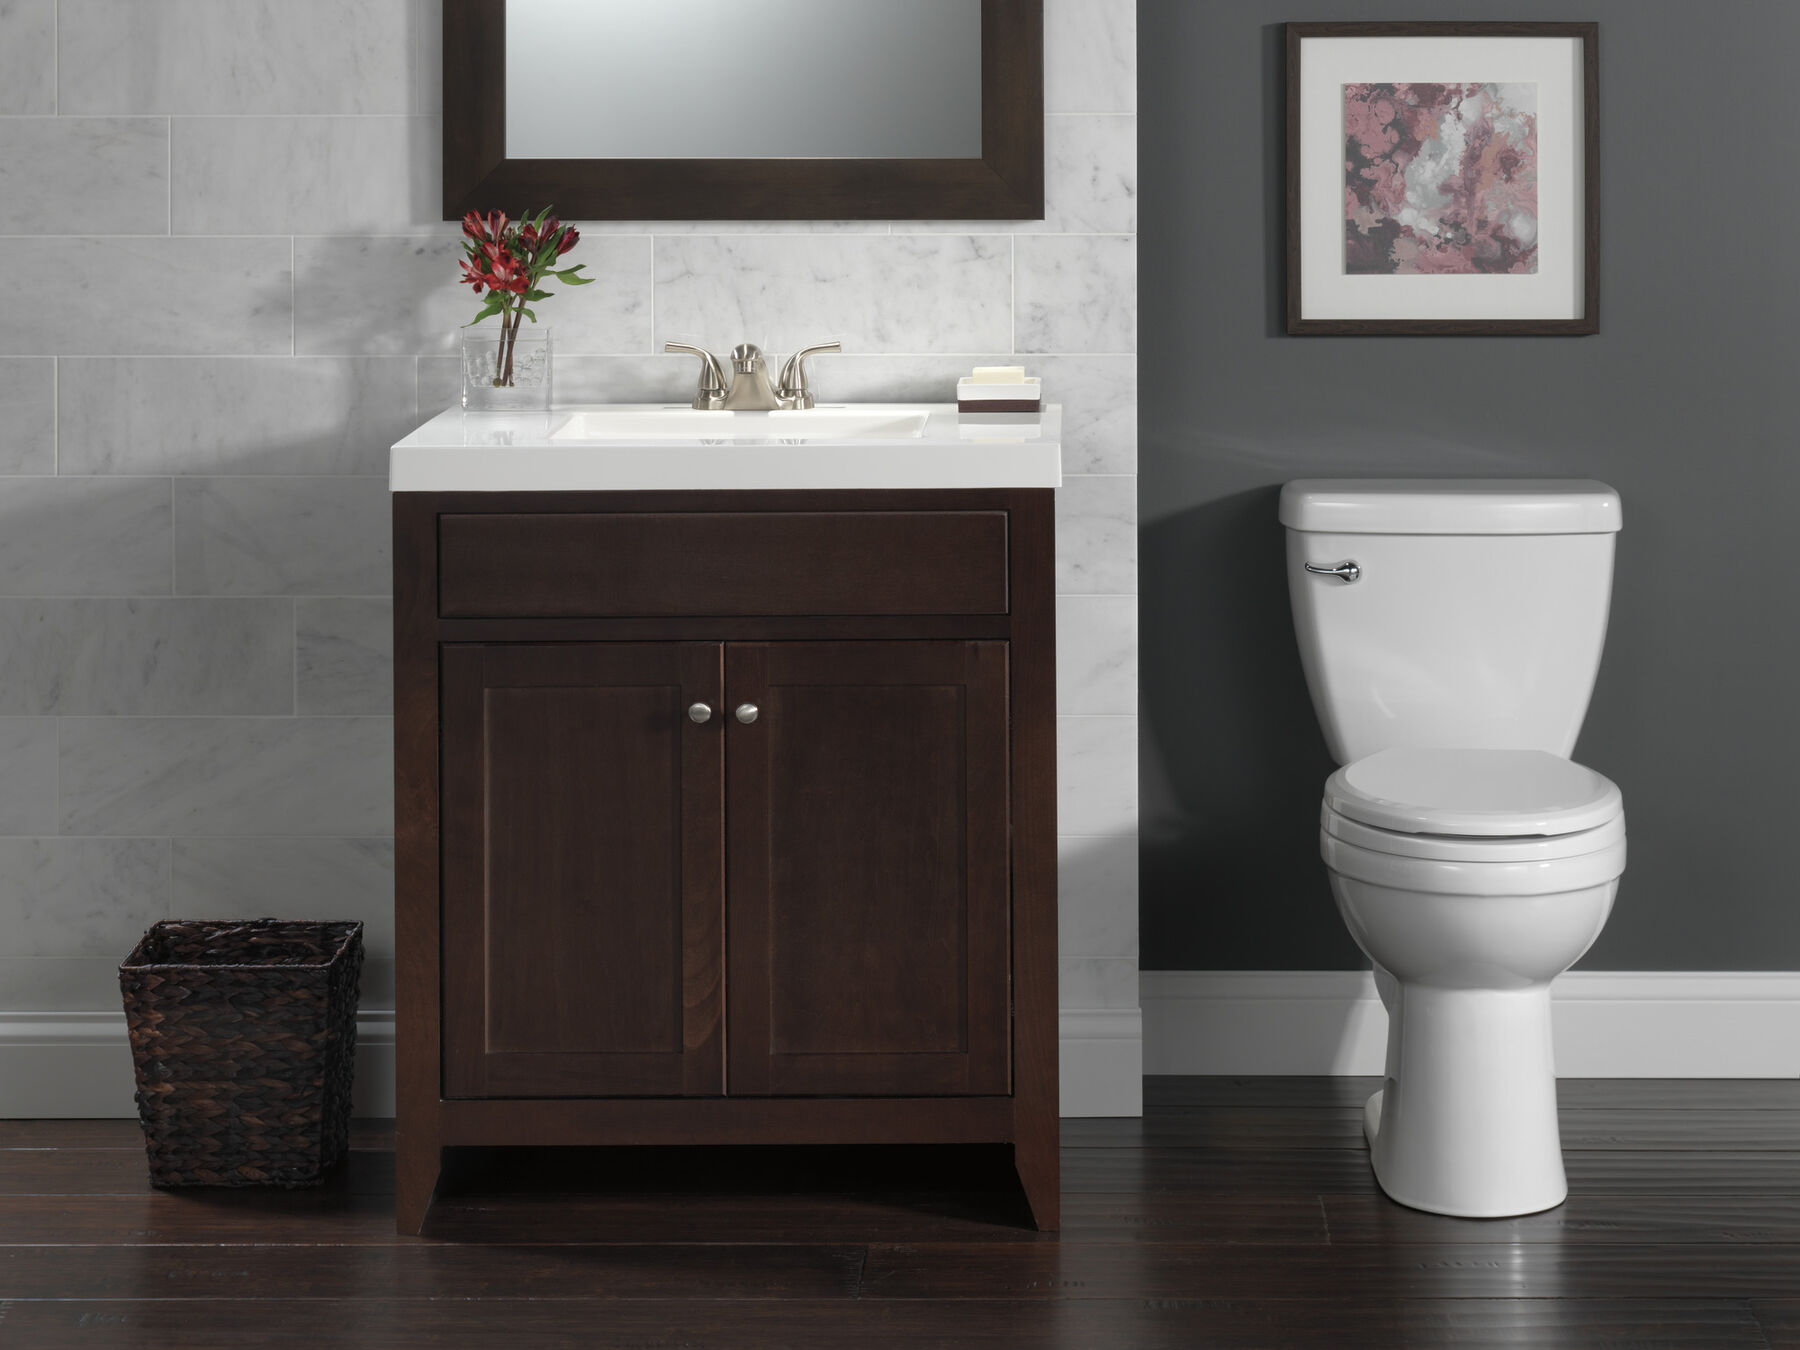 Round Front Toilet With Night Light Seat in White C01905-N-WH